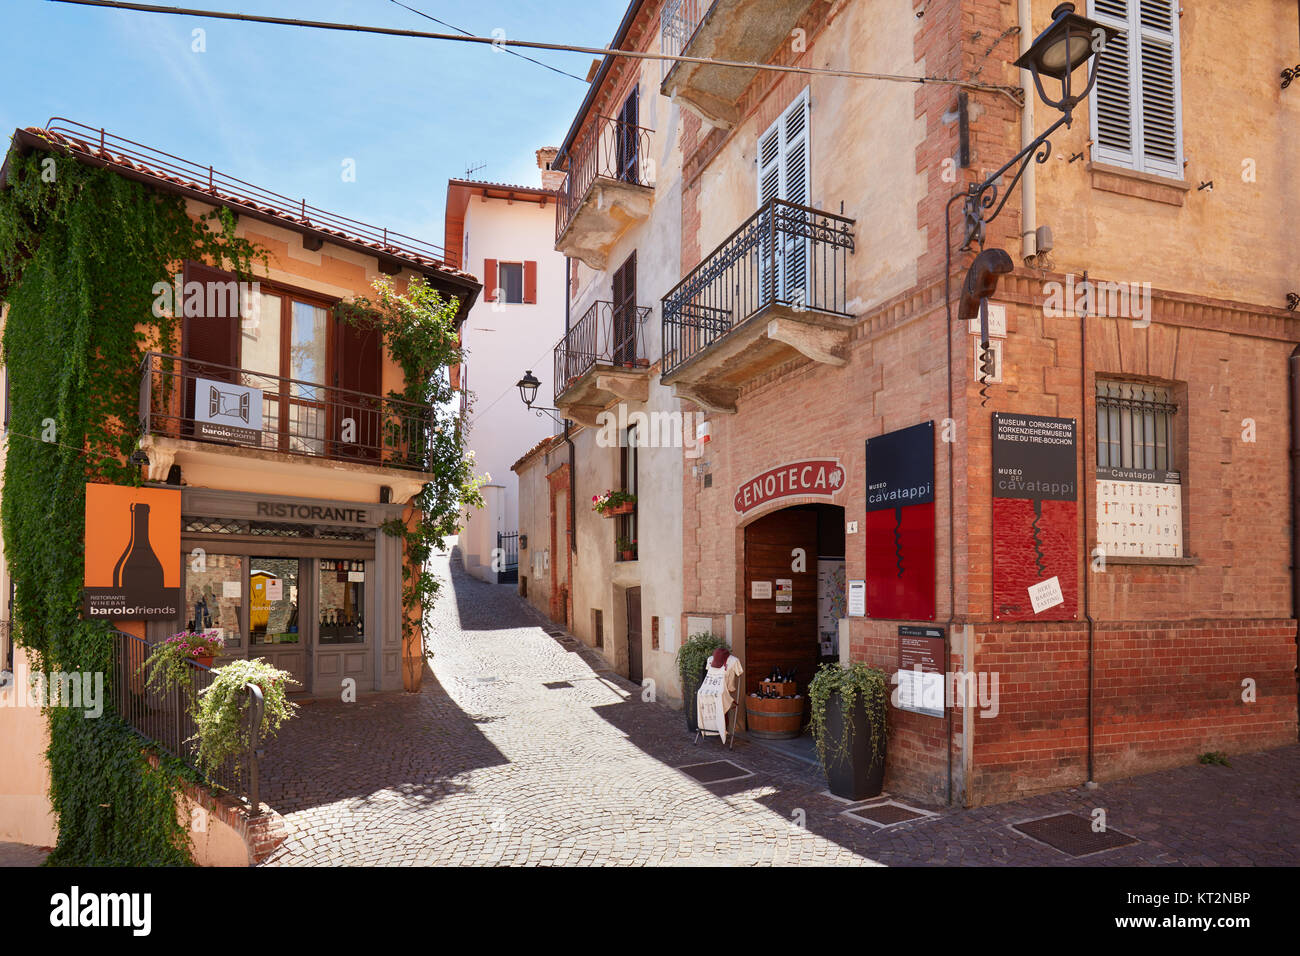 Corkscrew museum, restaurant and ancient street in a sunny summer day in Barolo, Italy Stock Photo